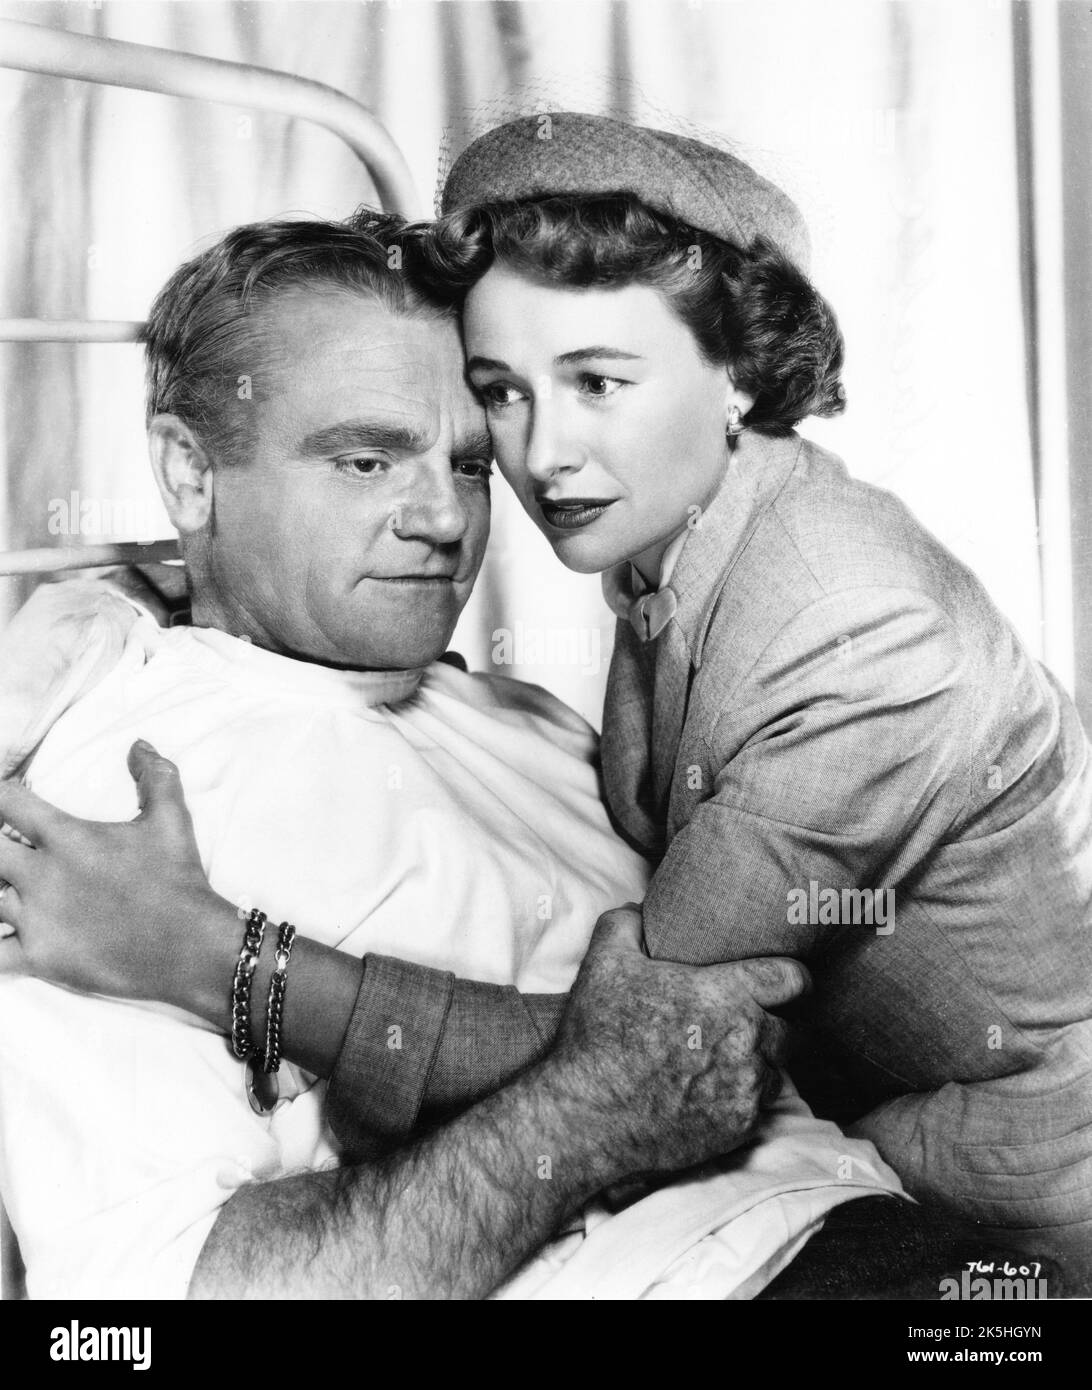 JAMES CAGNEY and PHYLLIS THAXTER in COME FILL THE CUP 1951 director GORDON DOUGLAS novel Harlan Ware screenplay Ivan Goff and Ben Roberts producer Henry Blanke Warner Bros. Stock Photo